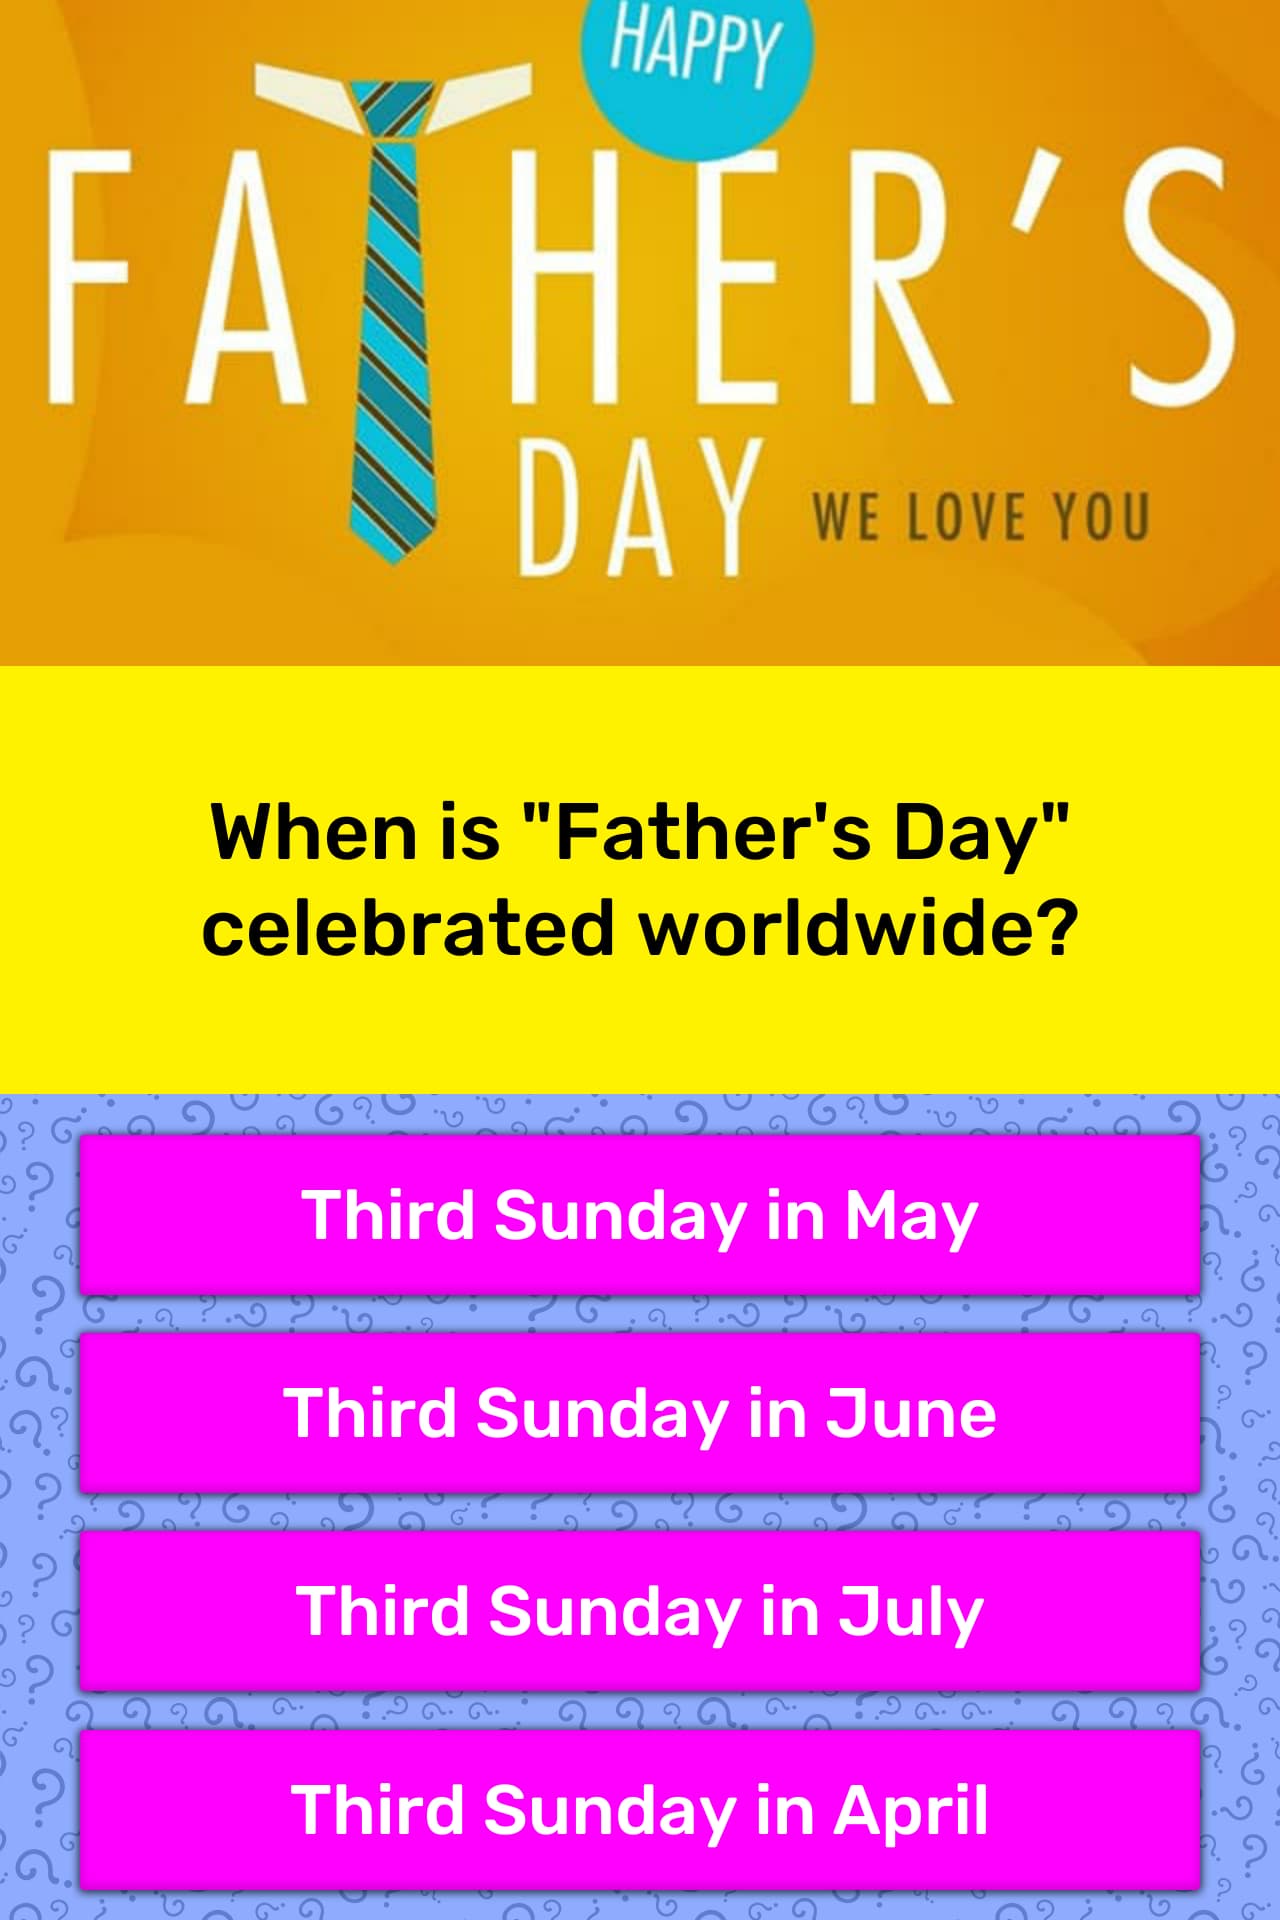 When is "Father's Day" celebrated? Trivia Answers